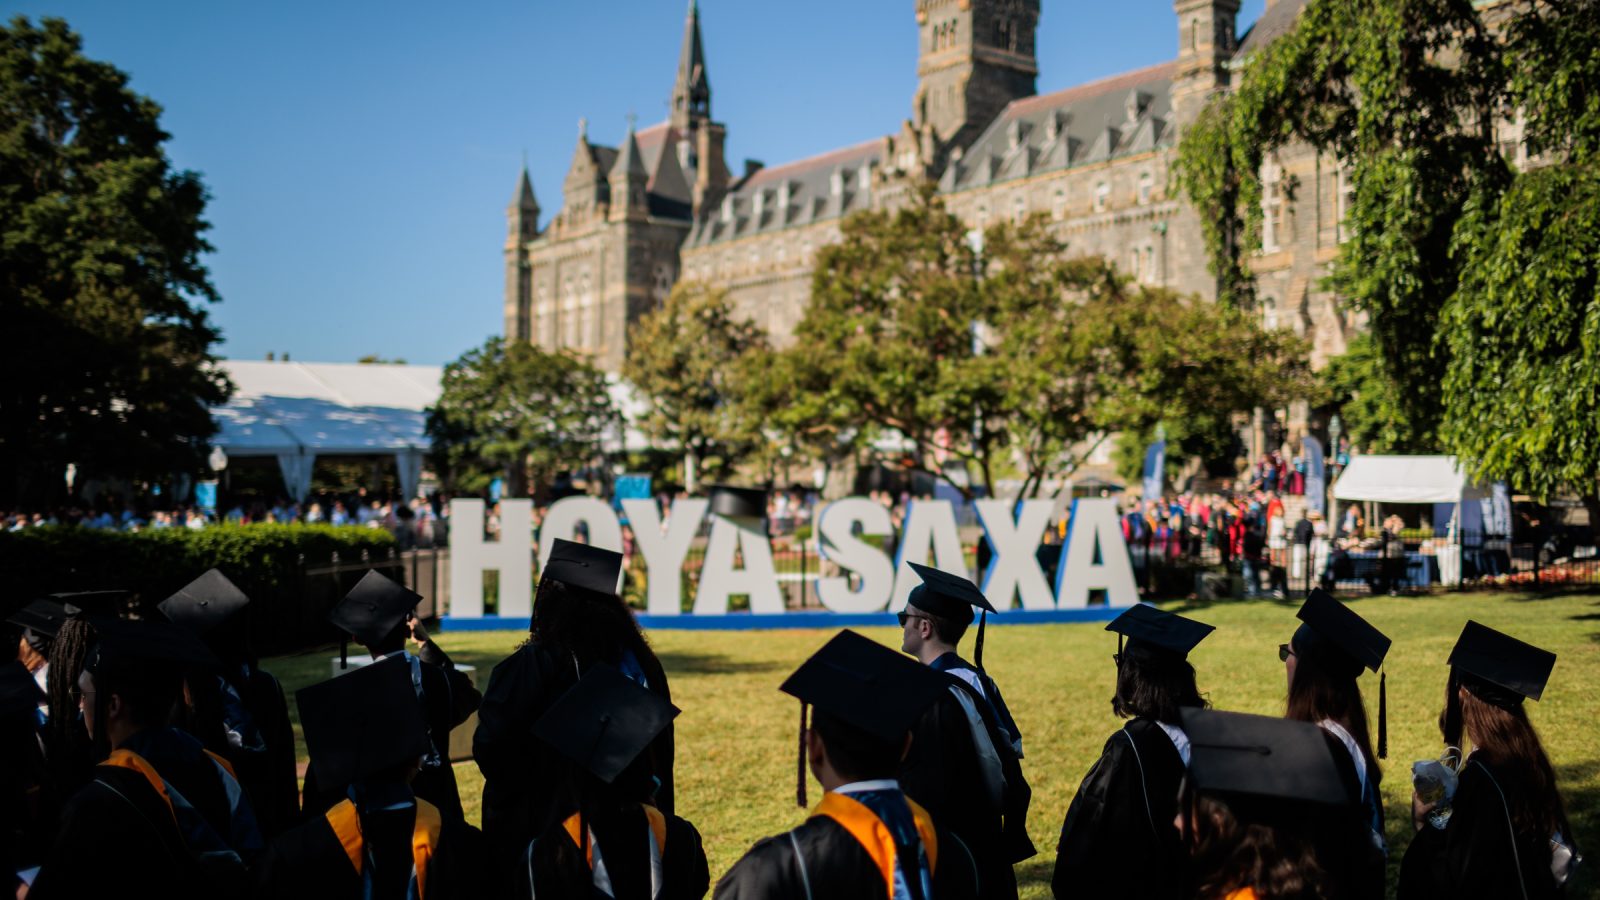 Members of the Class of 2020 process in front of a white Hoya Saxa sign at Georgetown University on May 28.